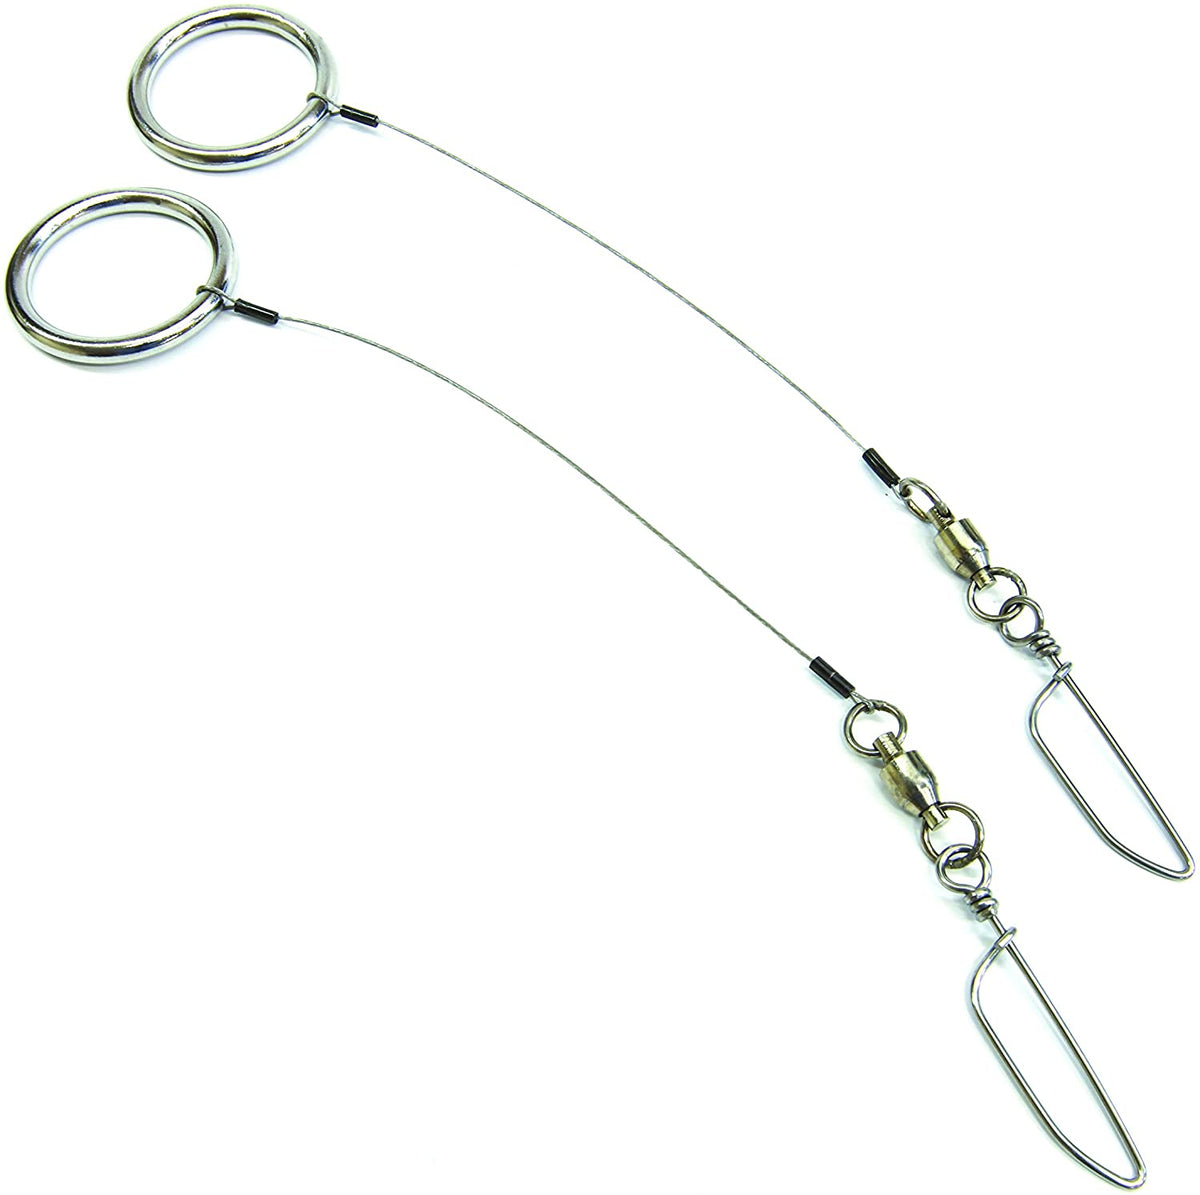 Tigress Outriggers Kite Ring Assembly (Pair)